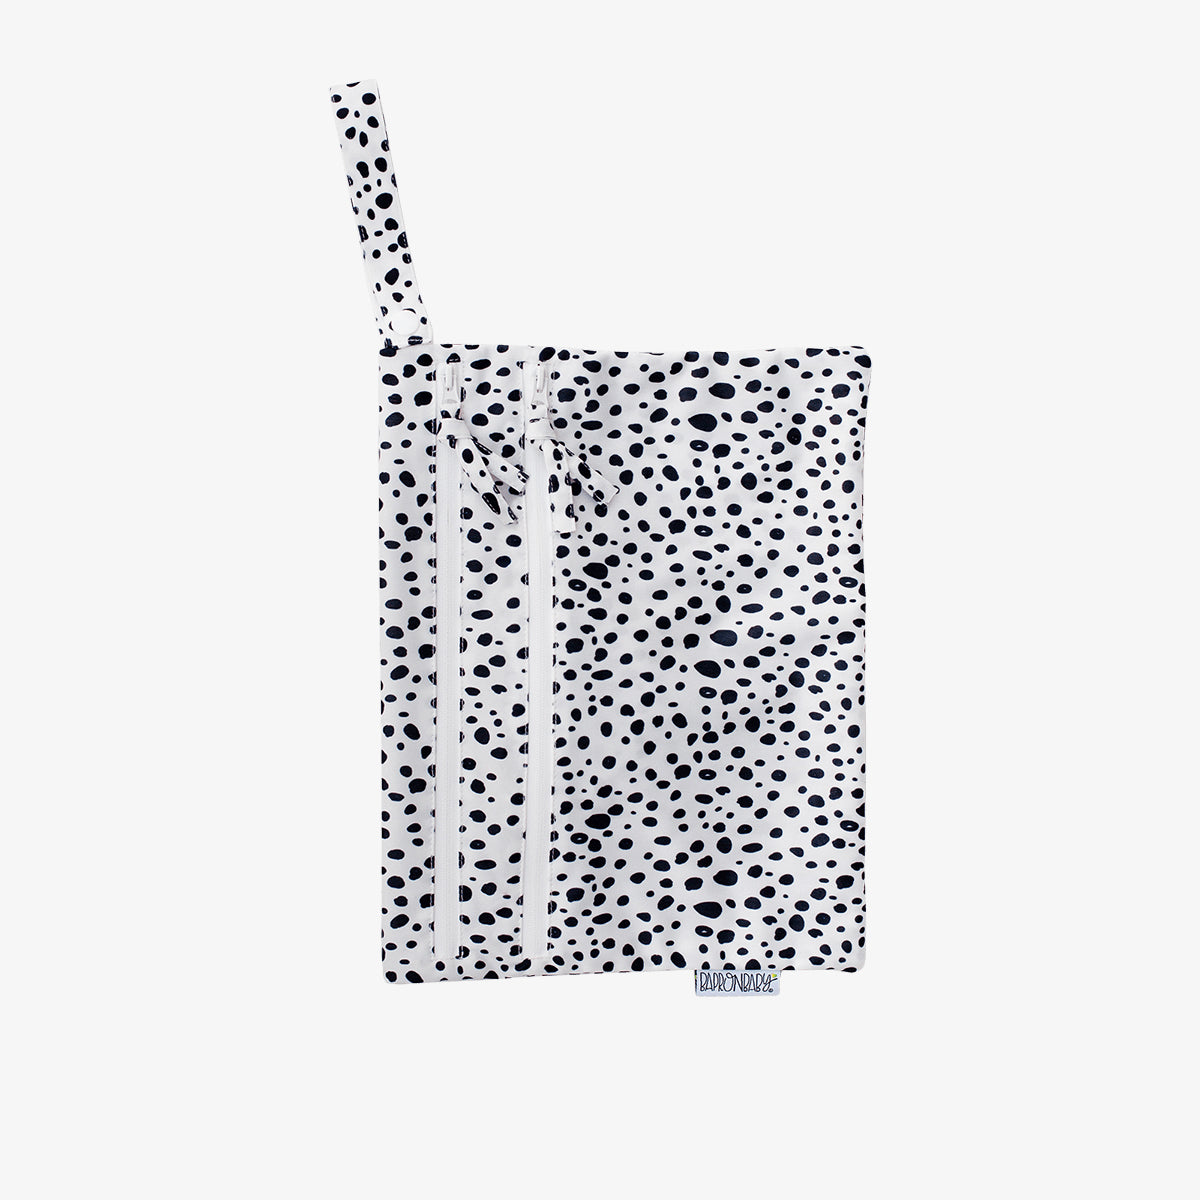 BapronBaby® Wet Bag in Organic Dots / Large Waterproof Zippered Pouch for Travel